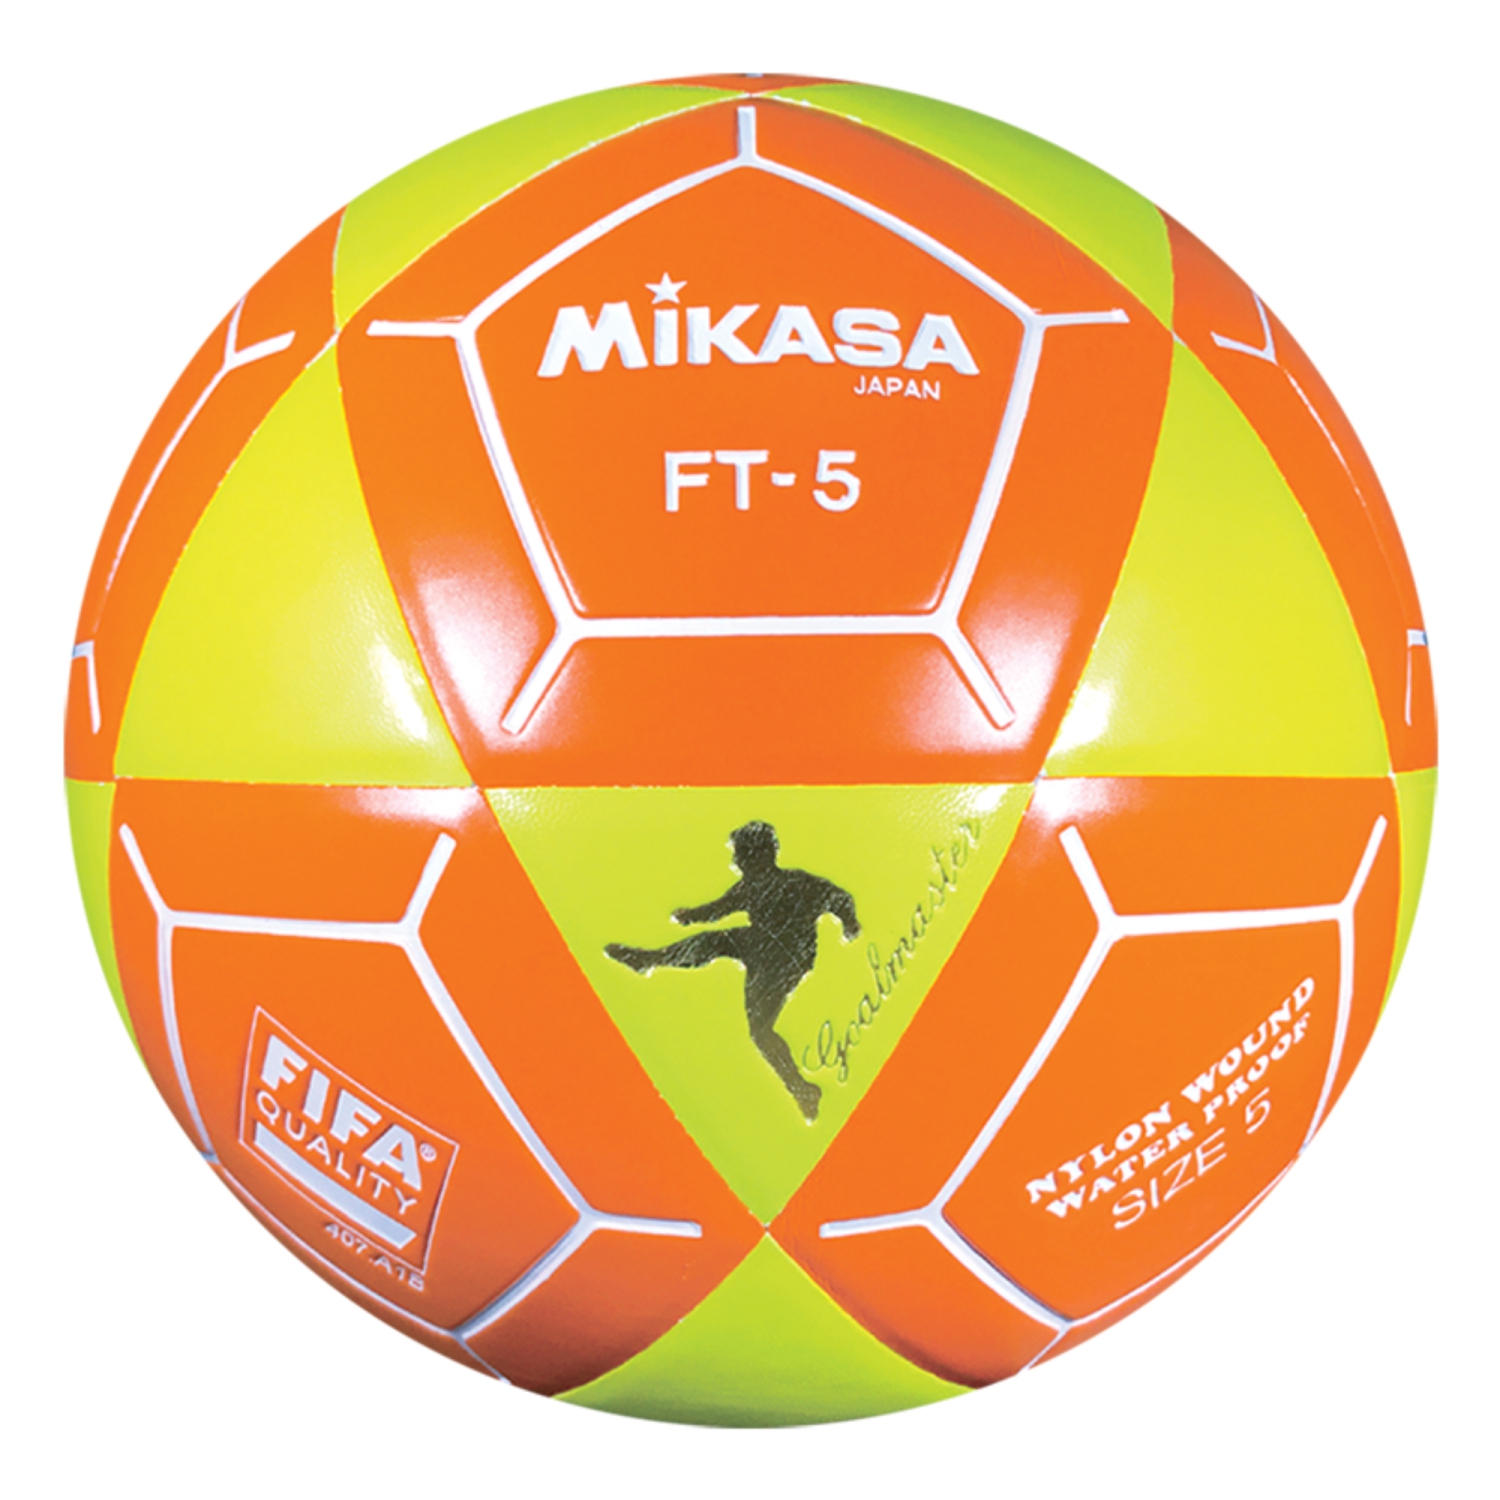 Mikasa Goal Master Soccer Ball - FT-5 Official FIFA and NFA Footvolley Size 5, Yellow/Orange